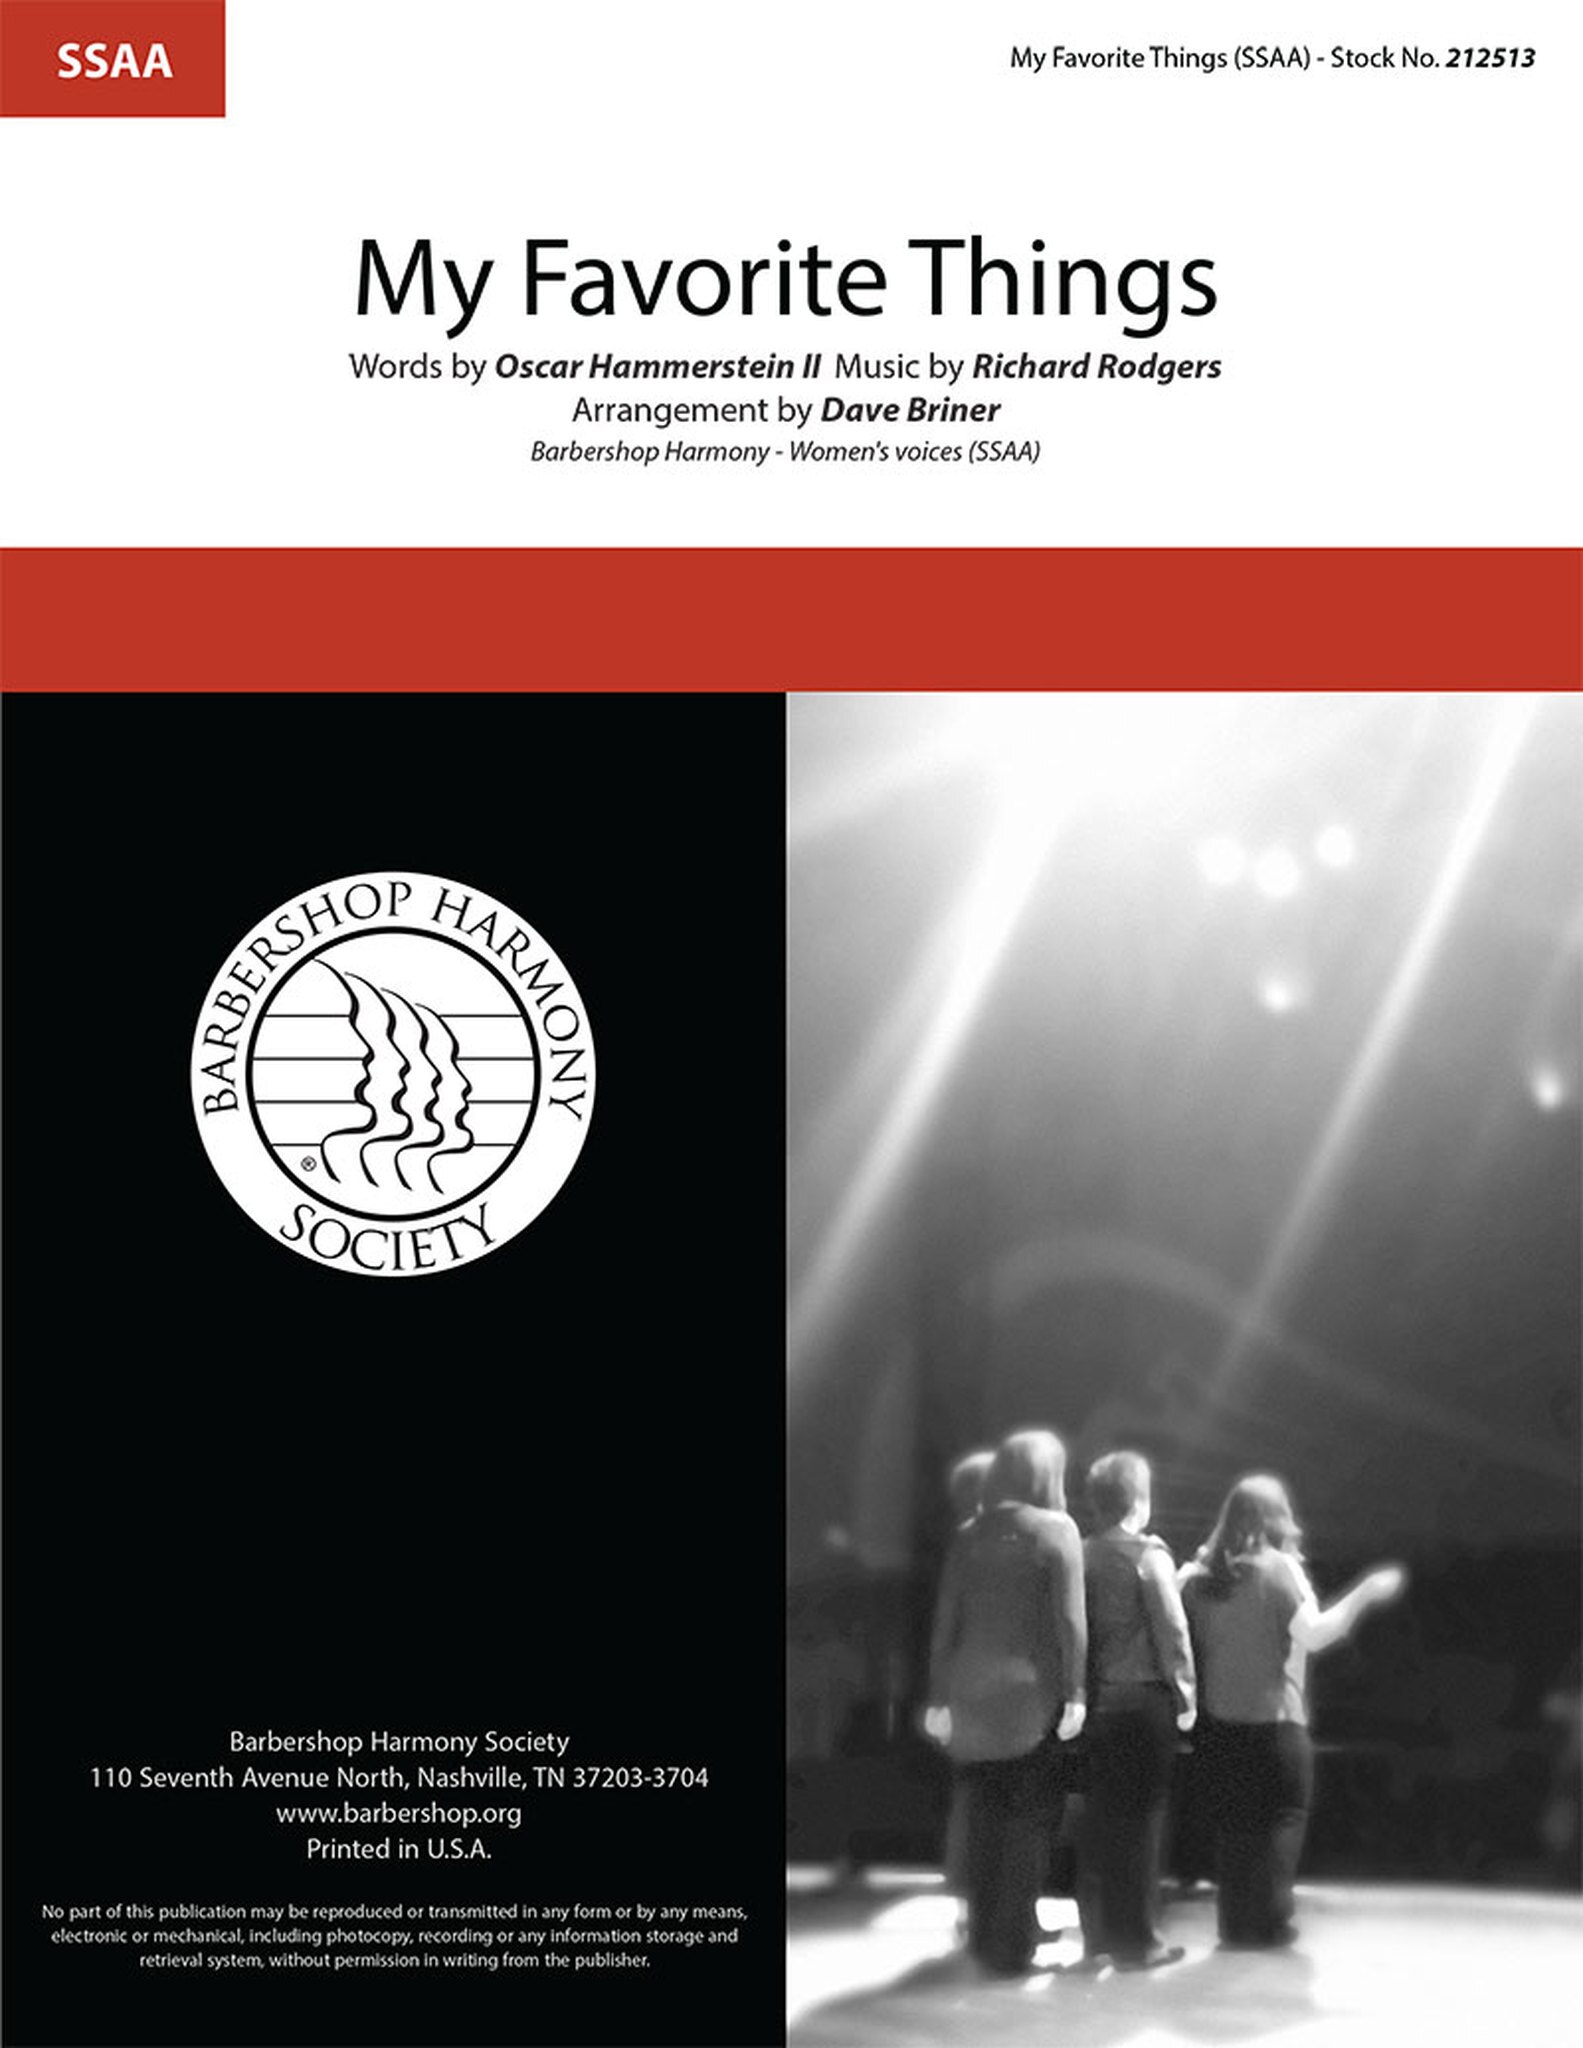 My Favorite Things : SSAA : Dave Briner : Richard Rodgers : The Sound Of Music : Songbook & Online Audio : 212513